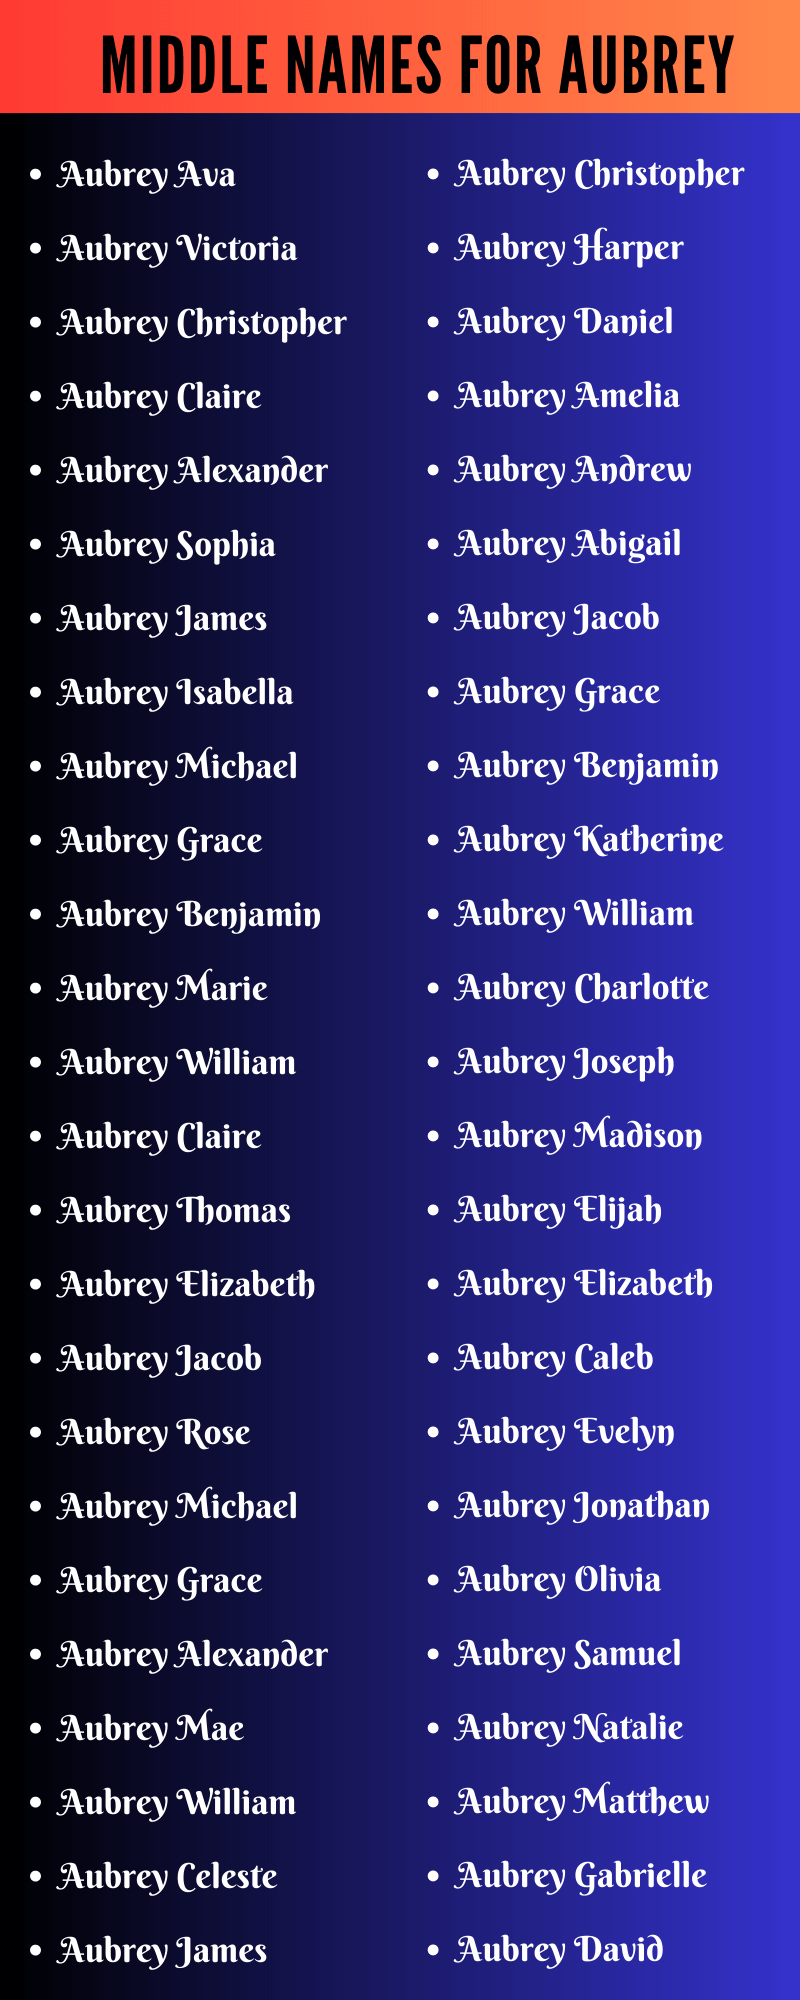 Middle Names For Aubrey